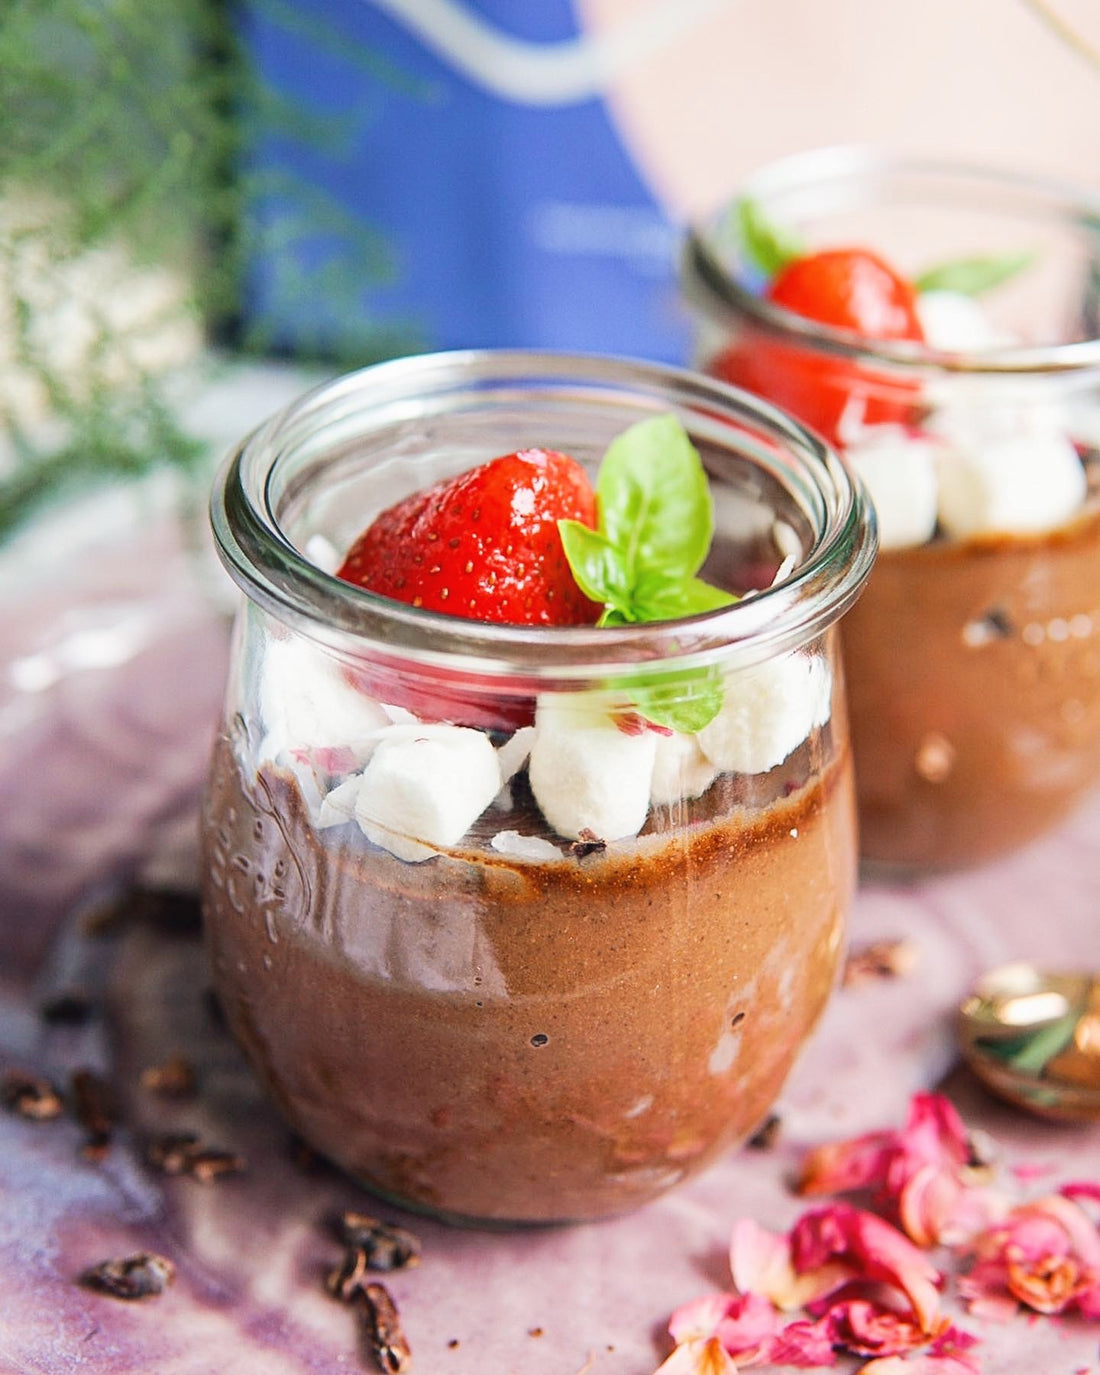 Guilt-Free Chocolate Protein Mousse